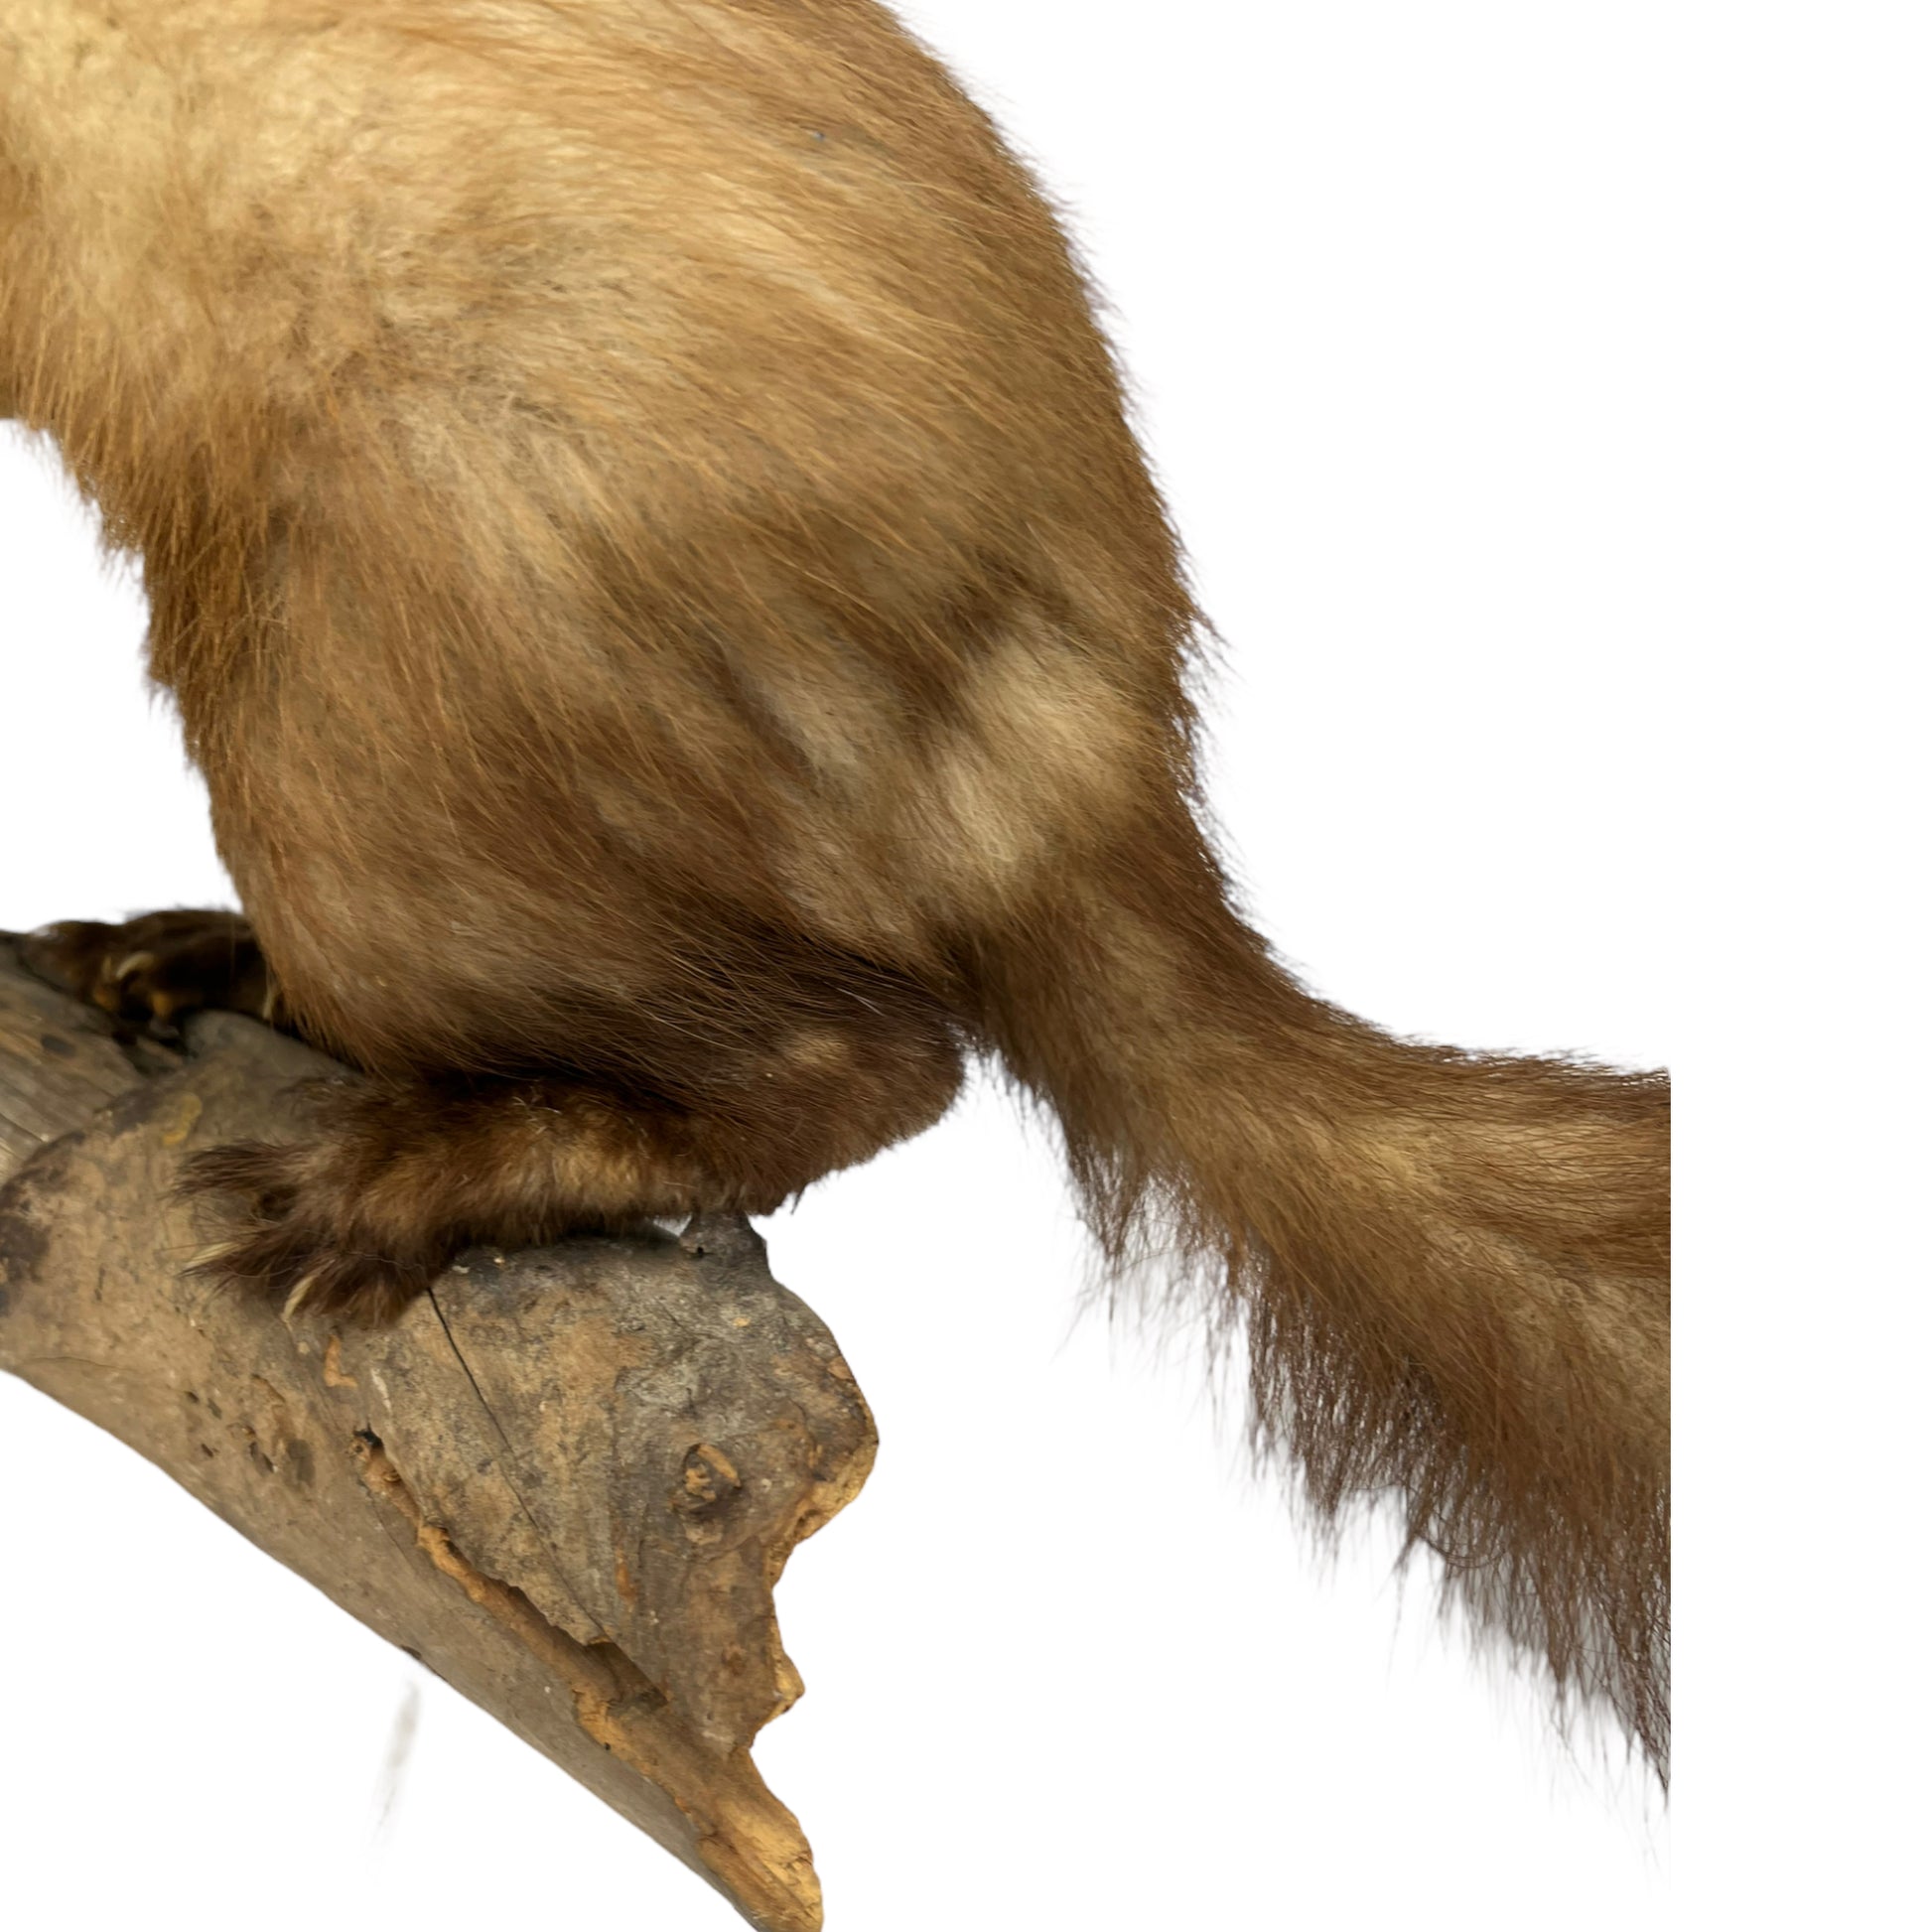 French taxidermy pine marten with a wooden branch mount 